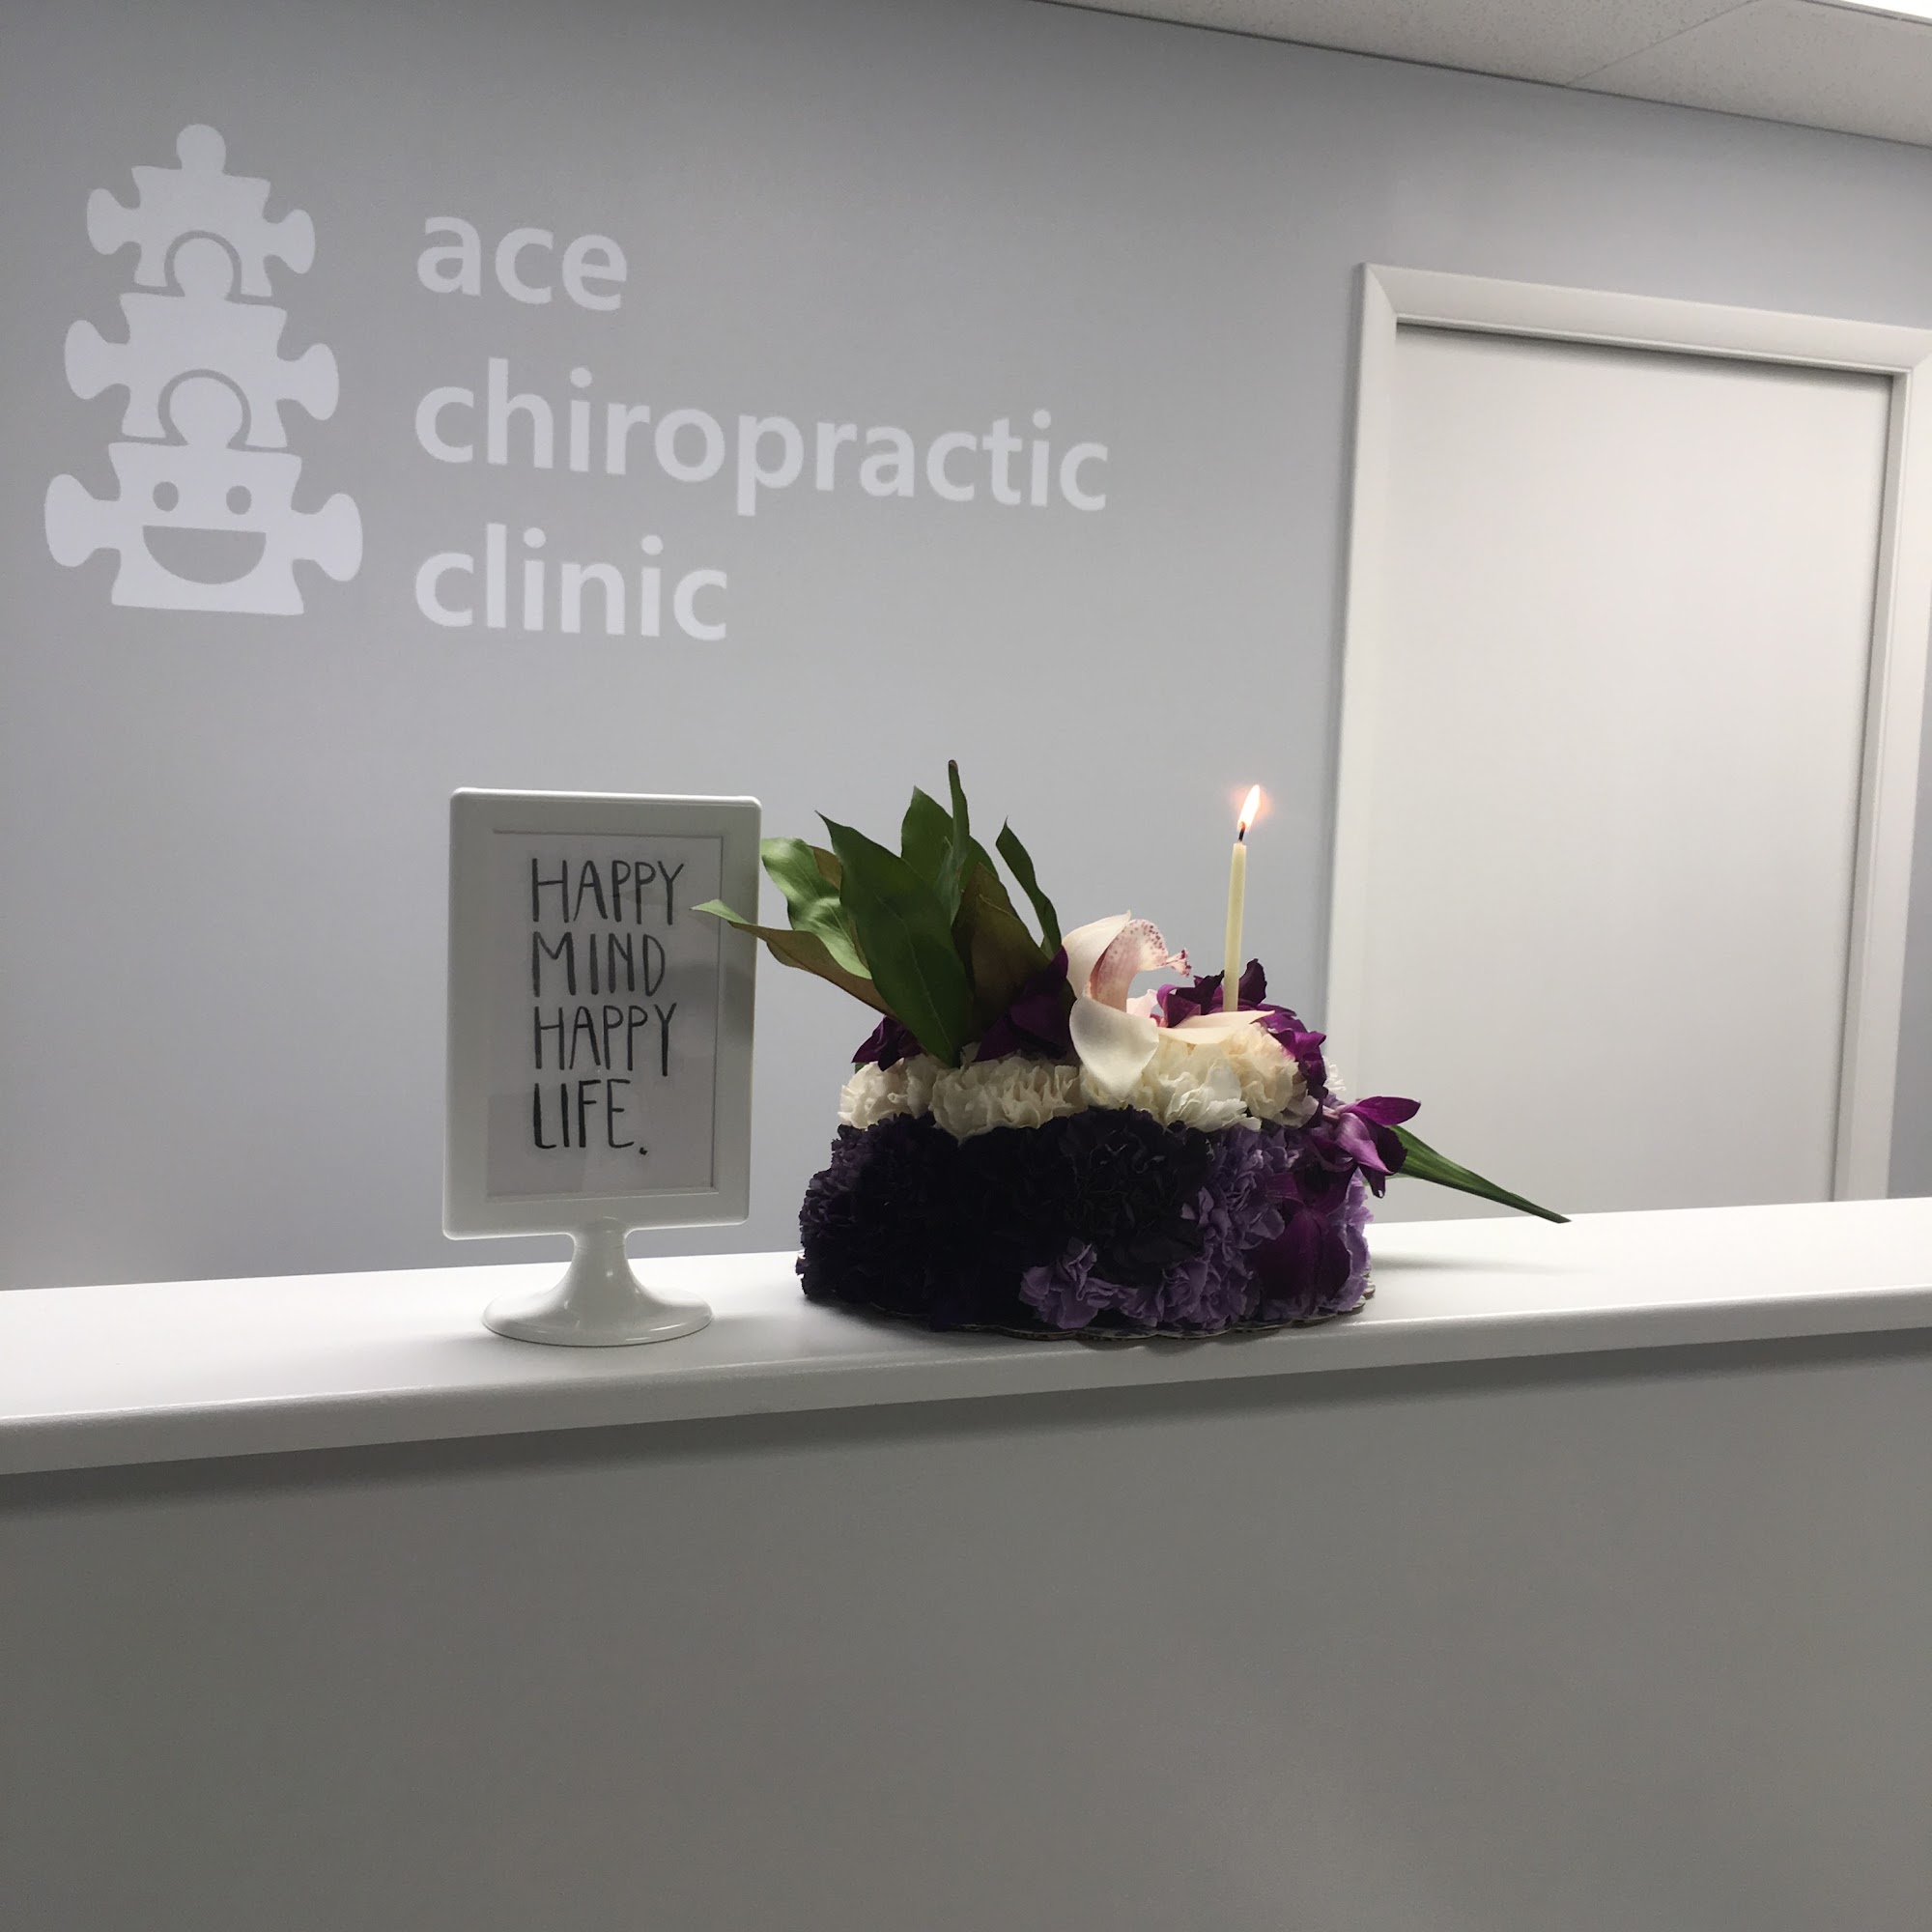 Ace Chiropractic Clinic